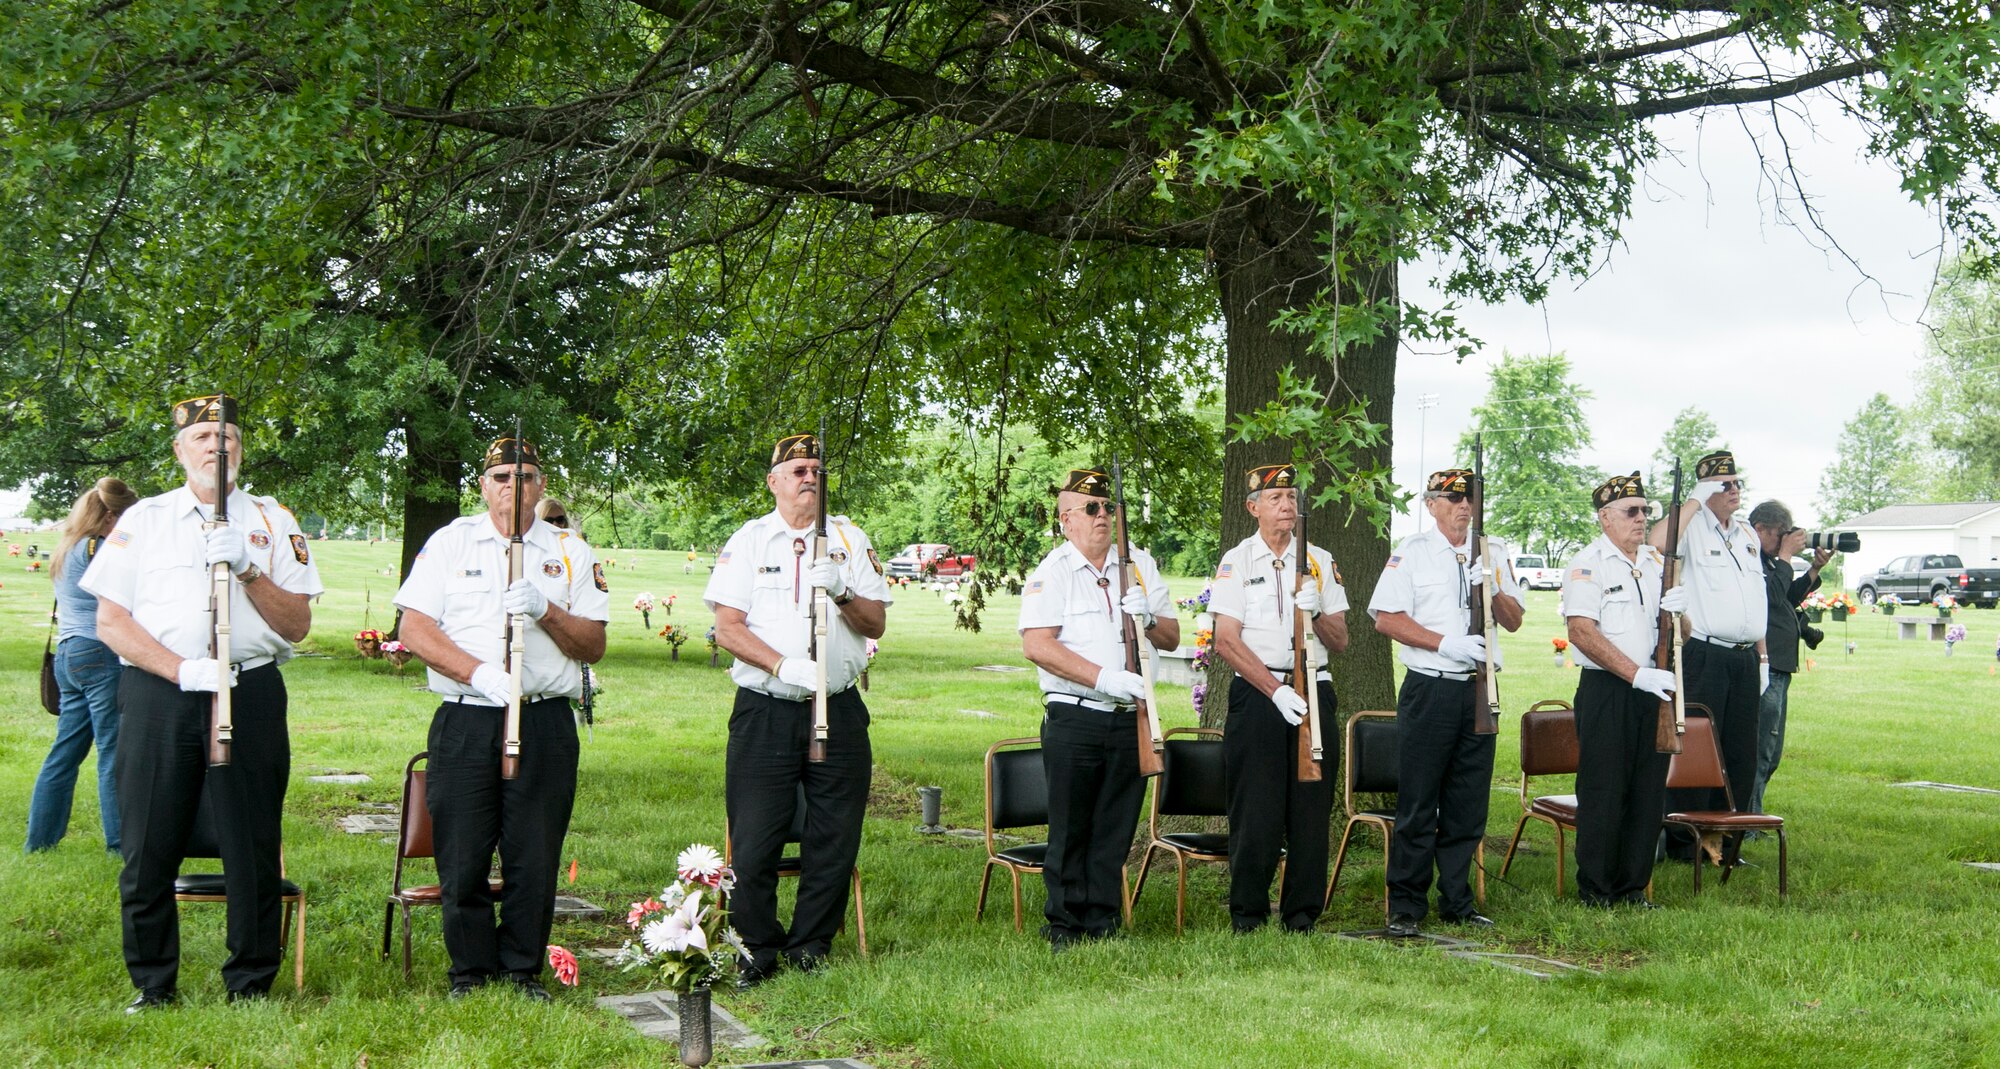 Veterans of Foreign Wars from Chapter 2591stand at attention after firing a three-rifle volley during the annual wreath-laying ceremony at the grave of 2nd Lt. George Whiteman May 16, 2015, in Sedalia, Mo. Each year, veterans around the area attend the ceremony to honor the ultimate sacrifice that the lieutenant made when he became one of the first Airmen to die during World War II.  (U.S. Air Force photo by Staff Sgt. Brigitte N. Brantley/Released)